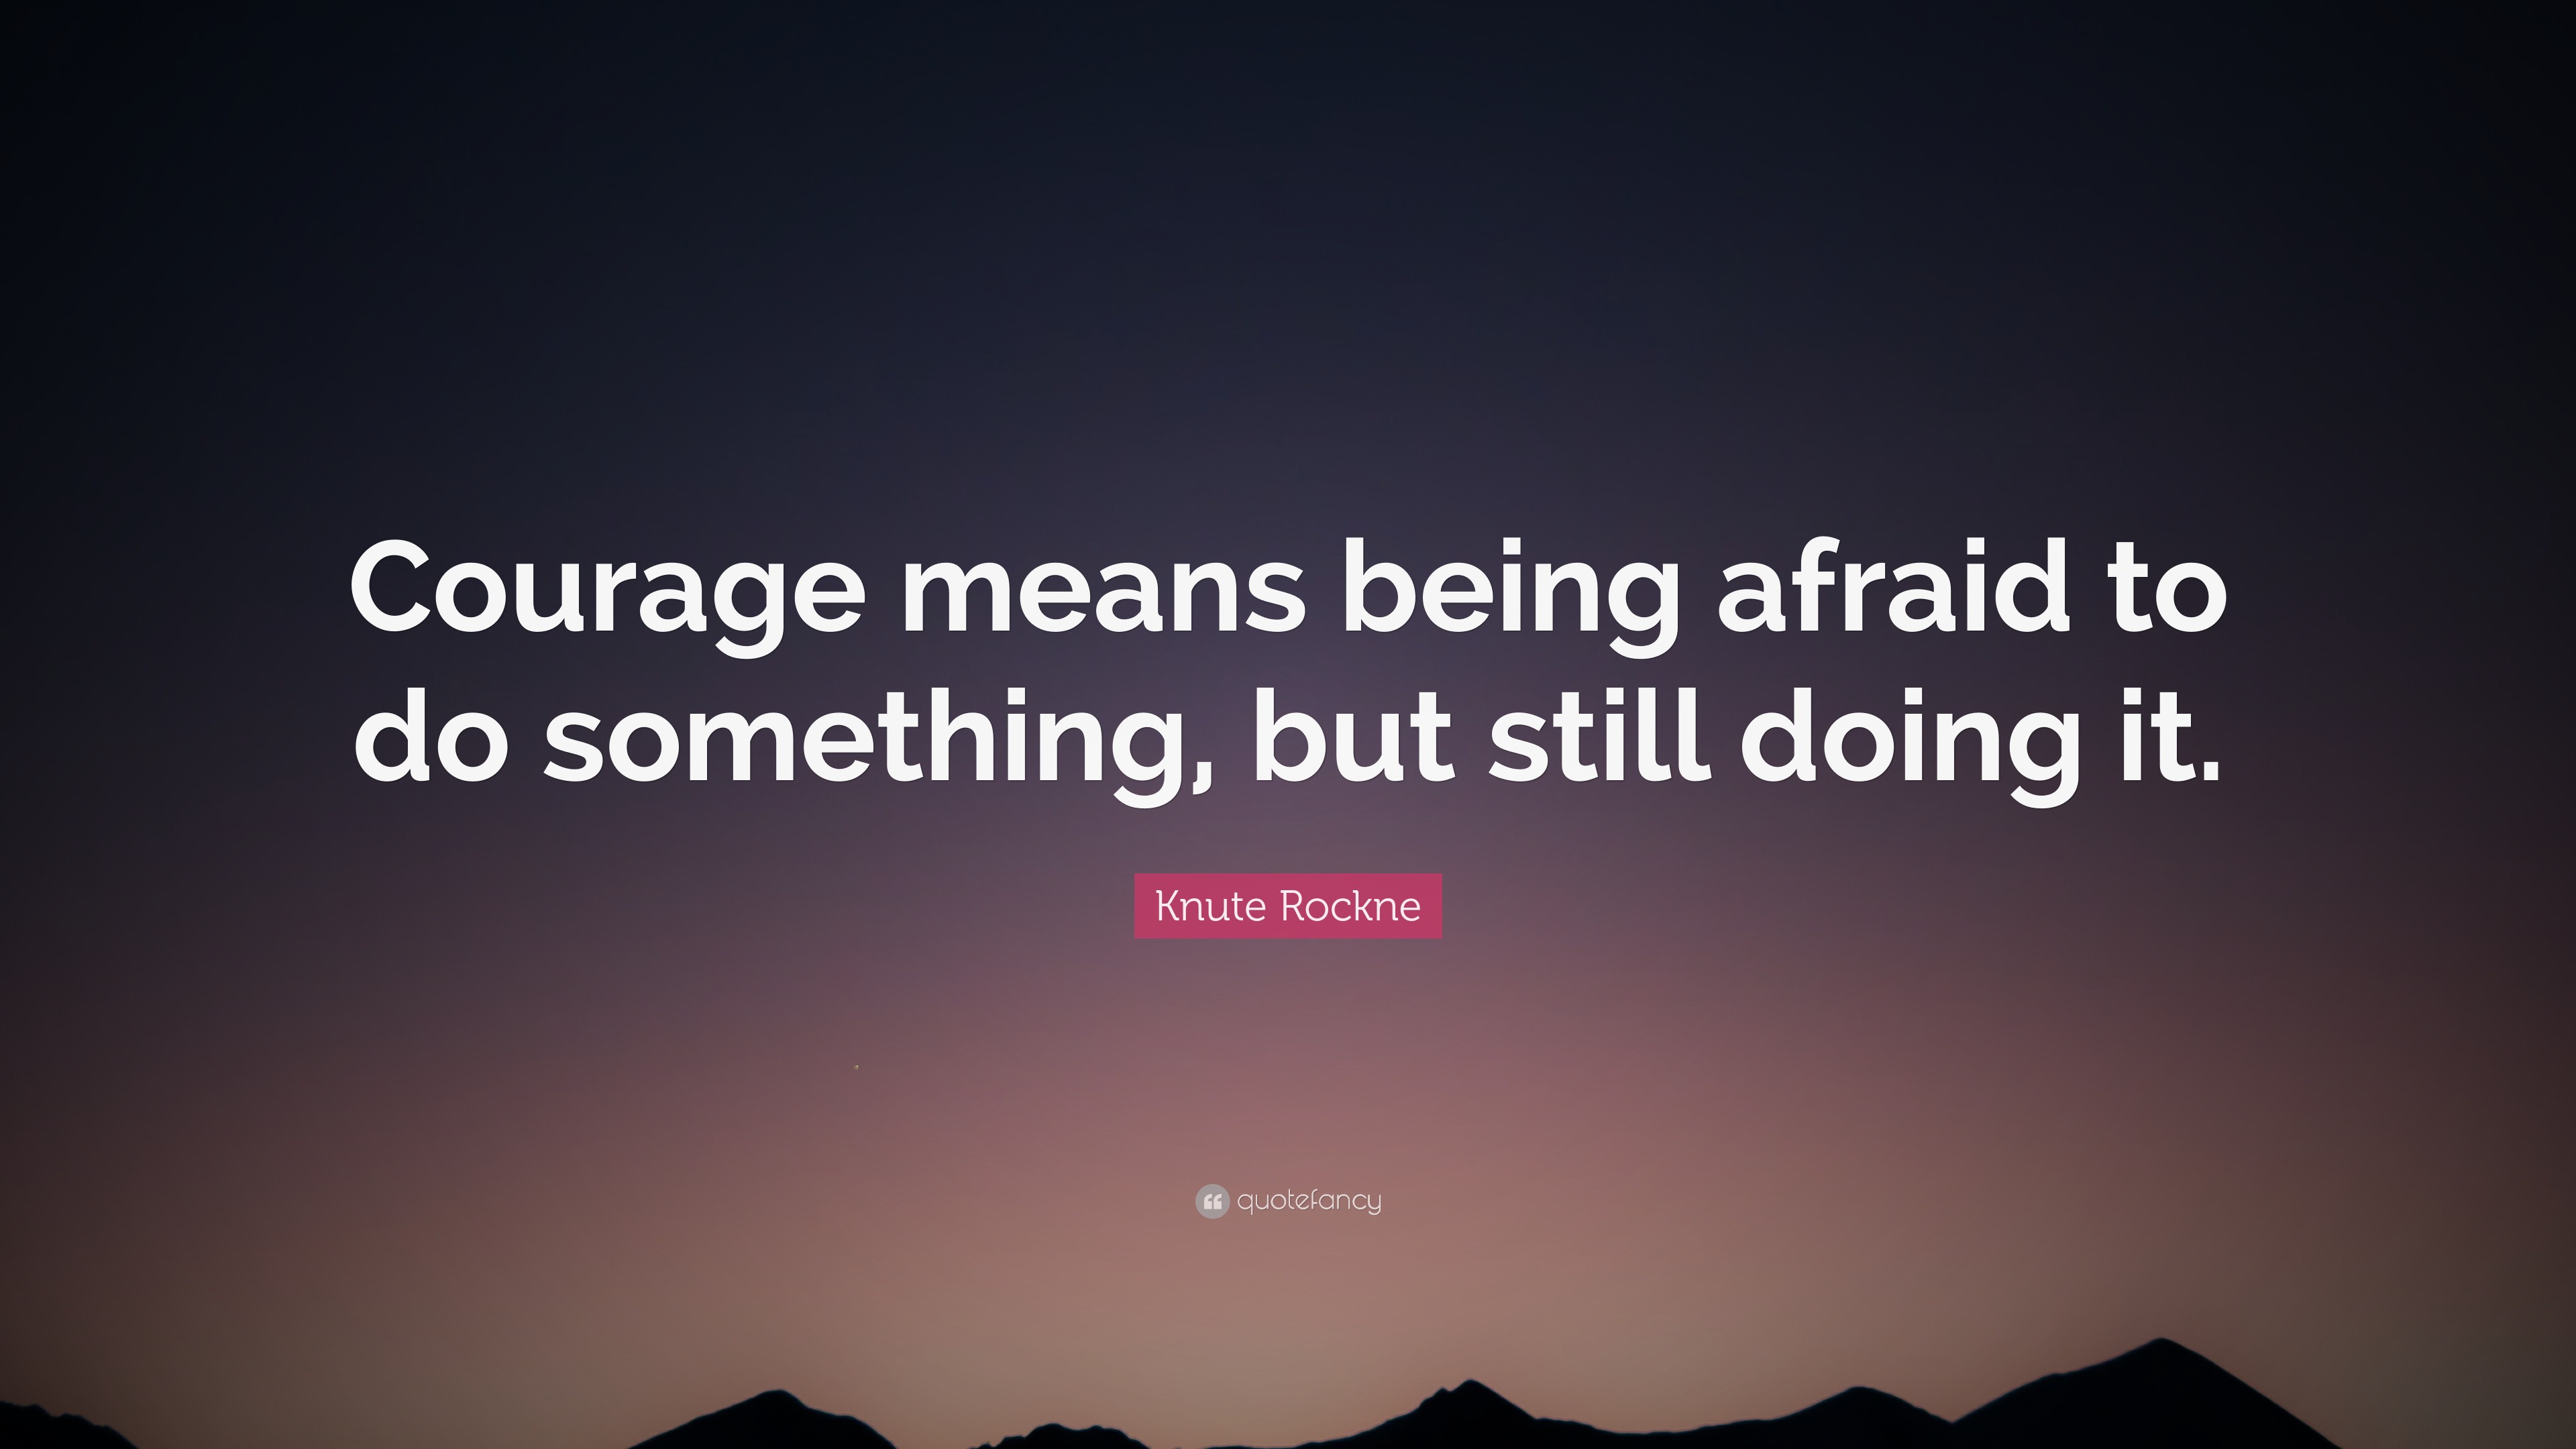 Knute Rockne Quote: “Courage means being afraid to do something, but ...